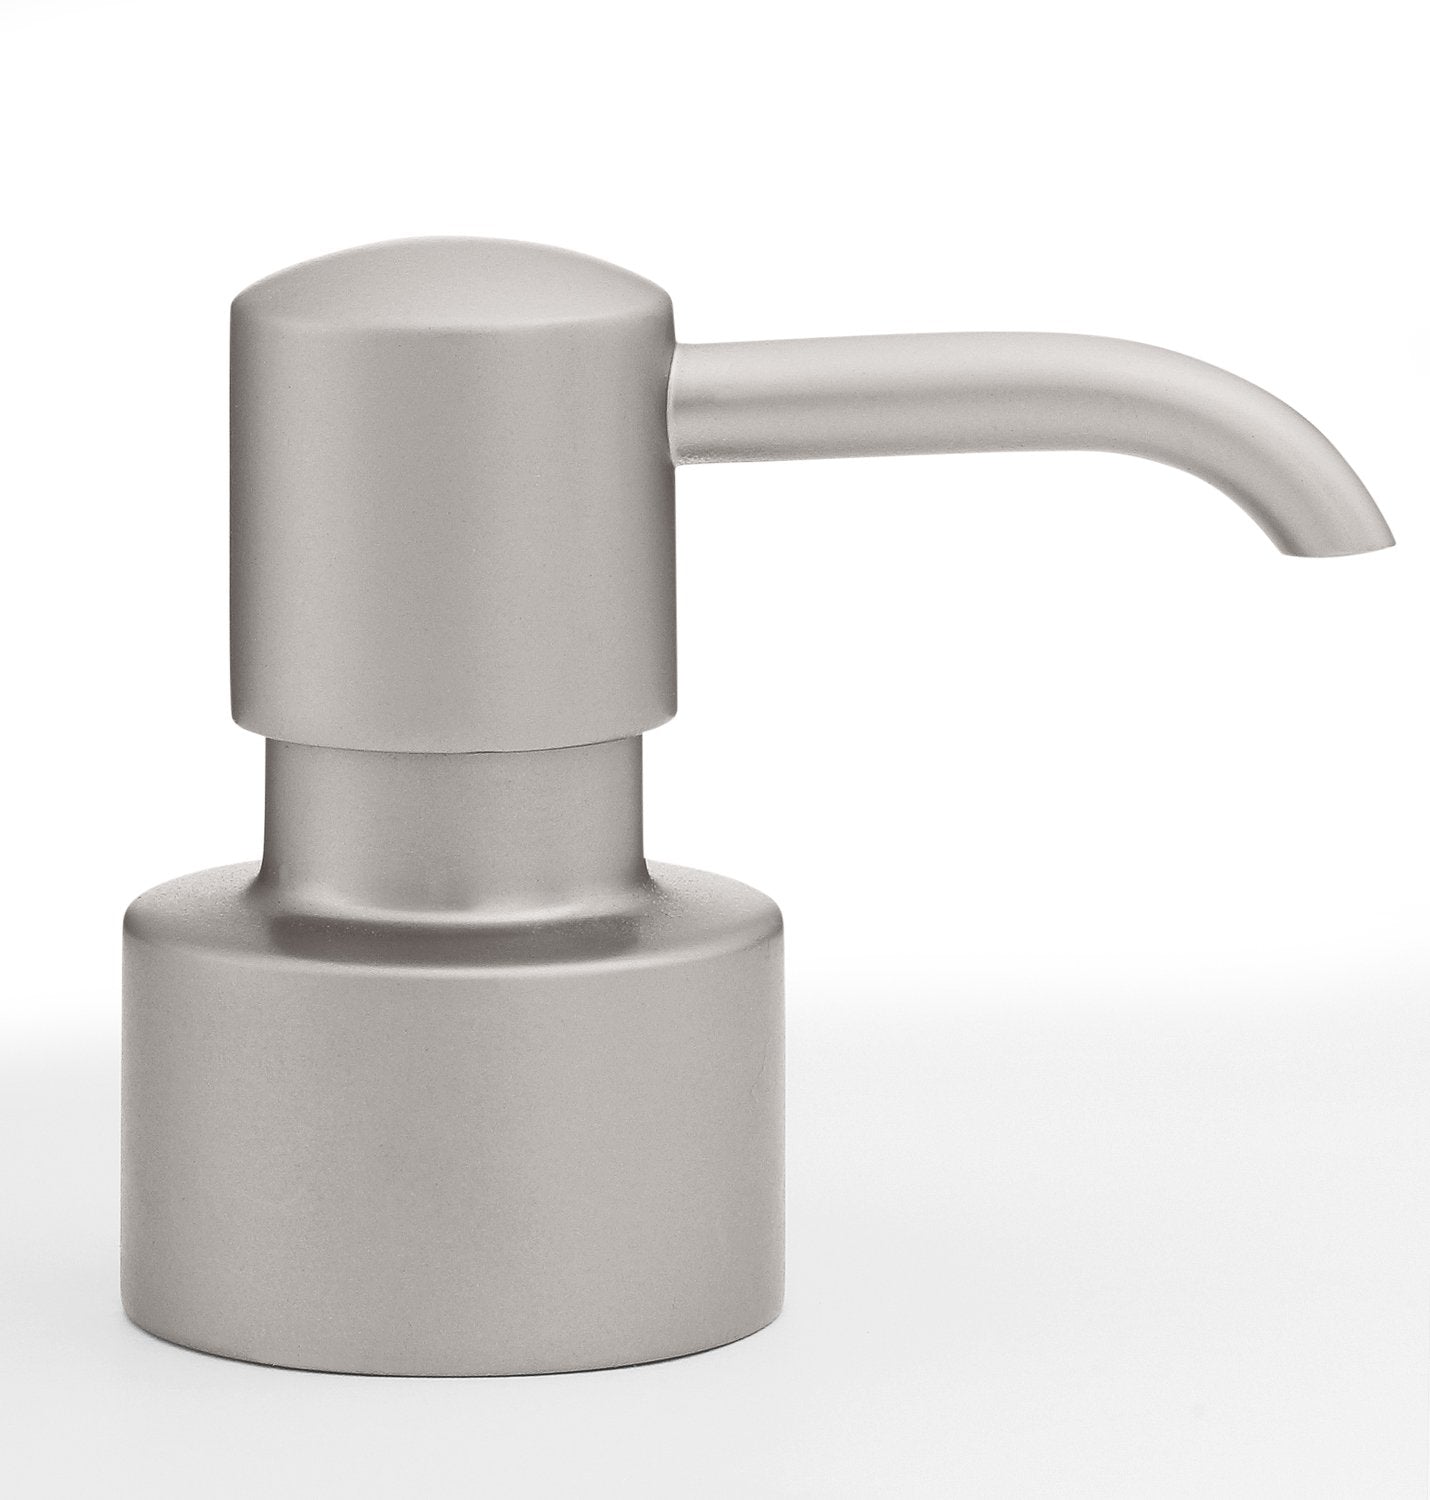 Pump Tops for Soap Dispensers - Pioneer Linens